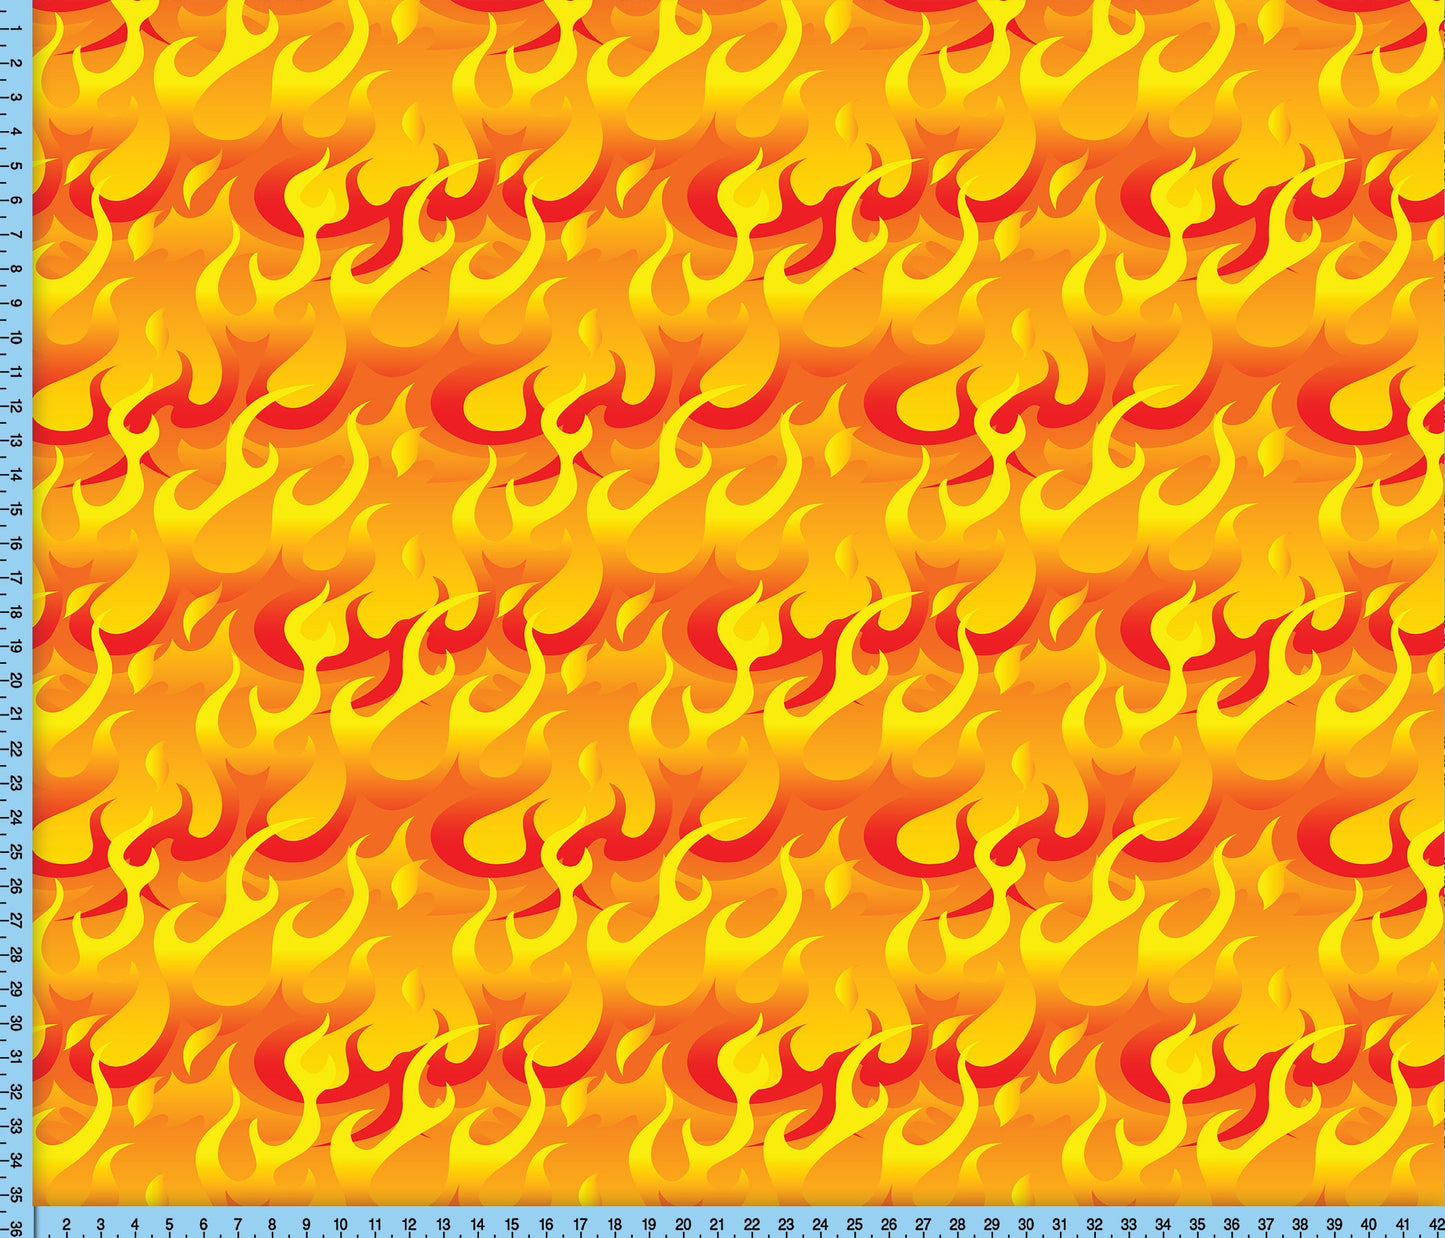 Yellow Flames Fabric Print, Tribal Tattoo Novelty Design Printed By the Yard for crafts, shirts, upholstery and masks